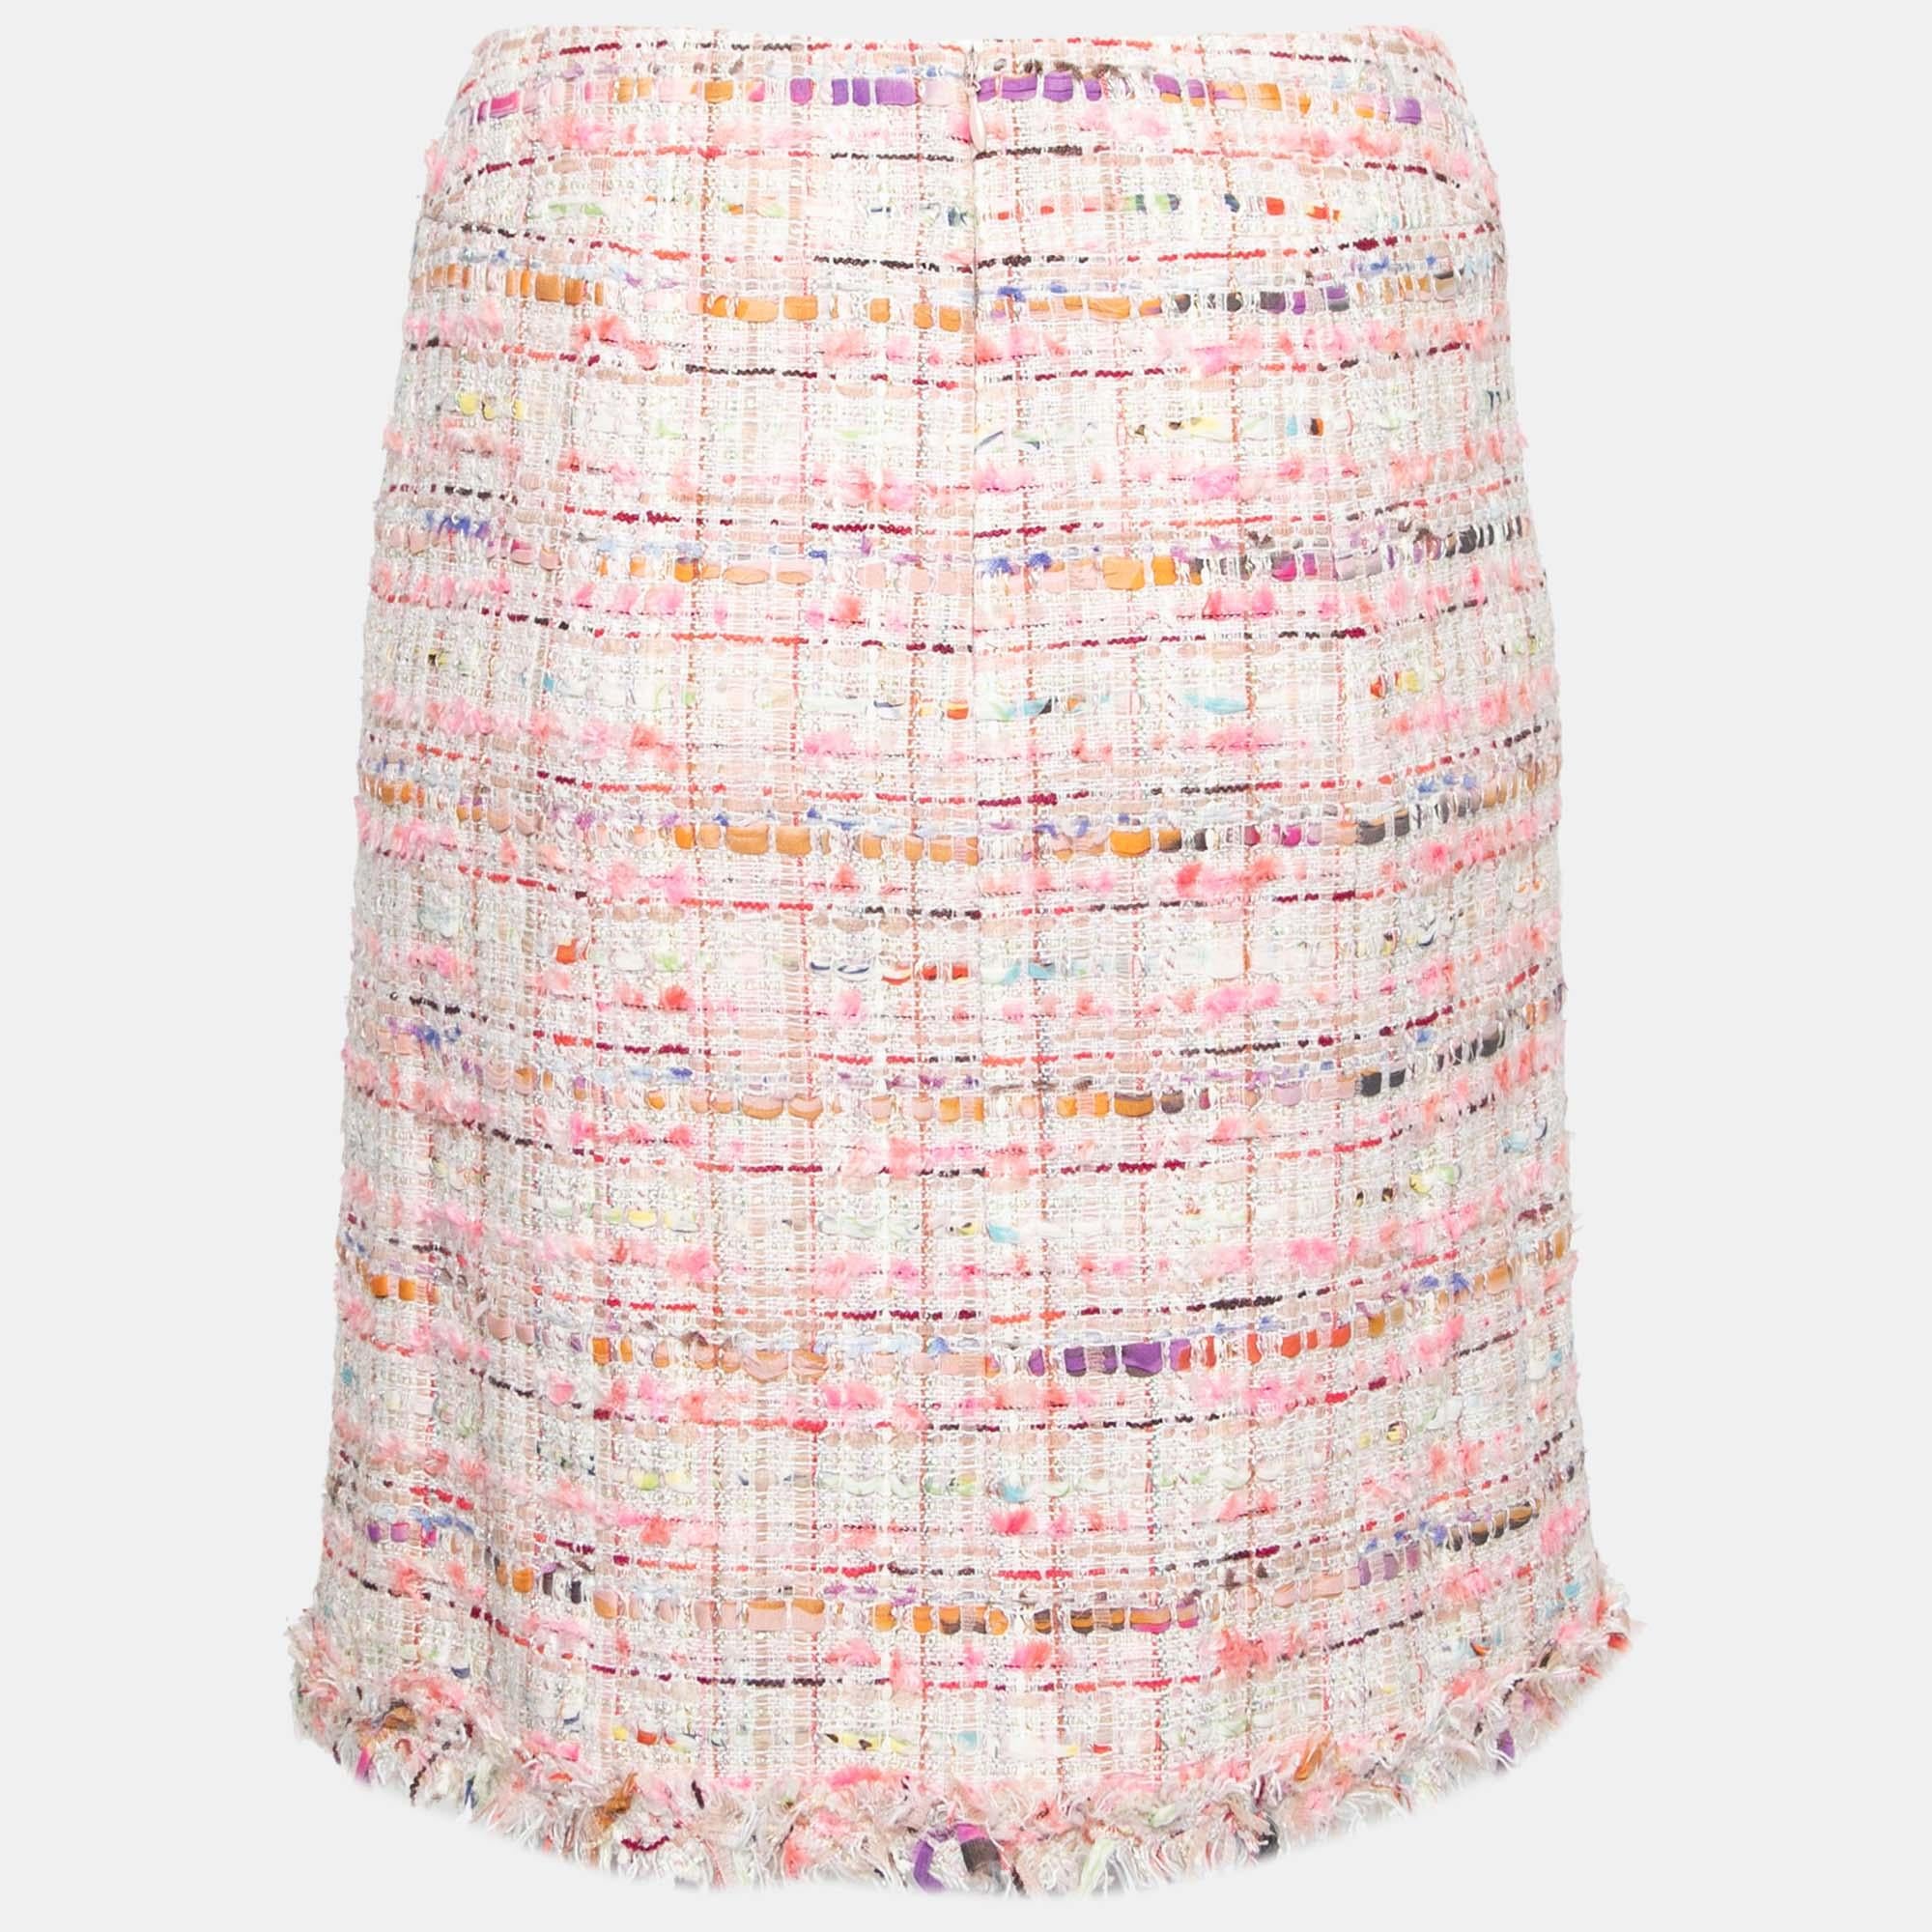 Come fall in love with Chanel's fine sartorial taste and excellence as you wear this stunning skirt. Created from the signature tweed fabric, the beauty of this pink skirt is accentuated with multicolored hues, fringed trims, and a short A-lined